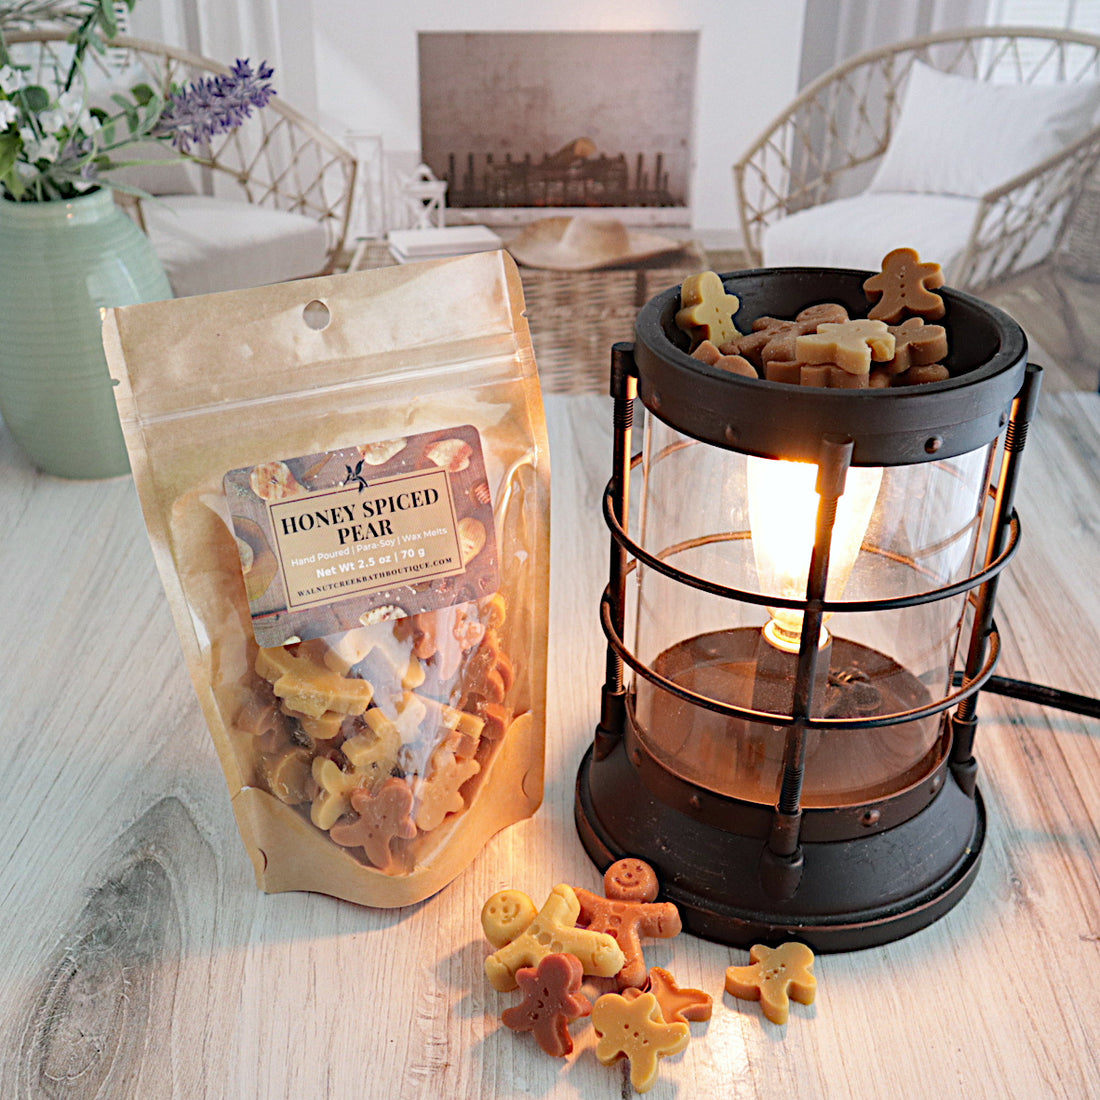 a bag of honey spiced pear wax melts are standing next to a lit burner full of the wax pieces. there are more wax pieces piled next to the burner. the wax is in the shape of small and large gingerbread men, and some are a tan color and some are a light brown color. this is all sitting on a washed out wooden base with a couple of chairs in the background next to a fireplace